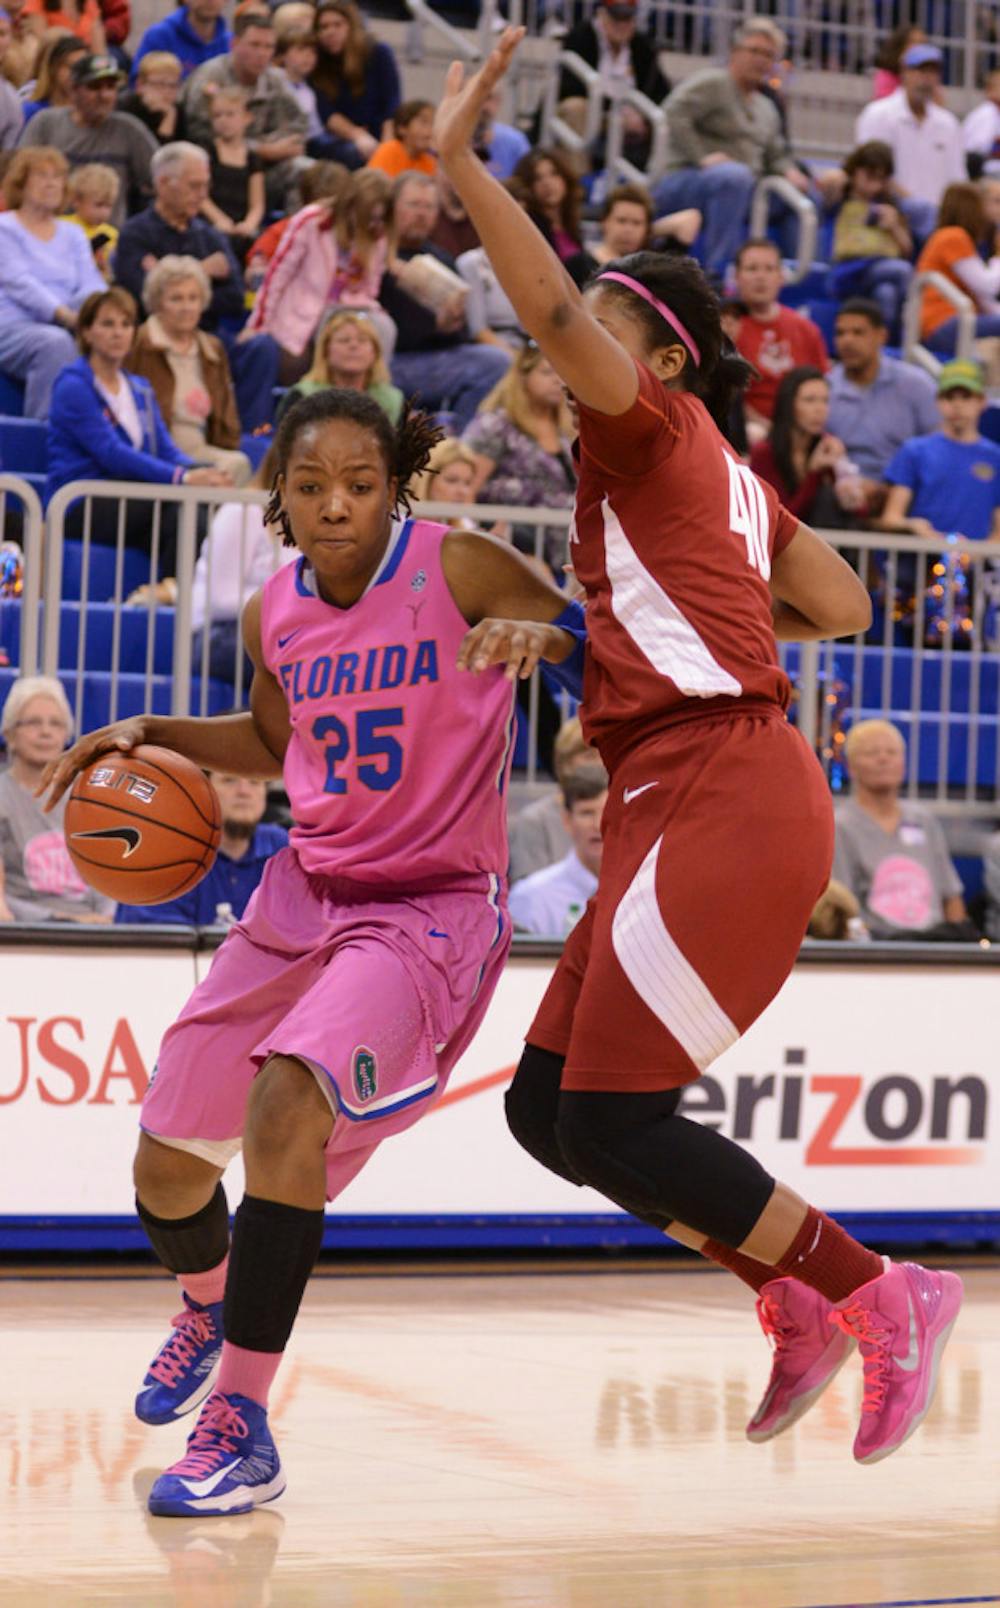 <p><span>Christin Mercer (25) drives the lane in UF’s 87-54 win against Alabama on Feb. 3. Coach Amanda Butler has identified Mercer as an important post player for the Gators.</span></p>
<div><span><br /></span></div>